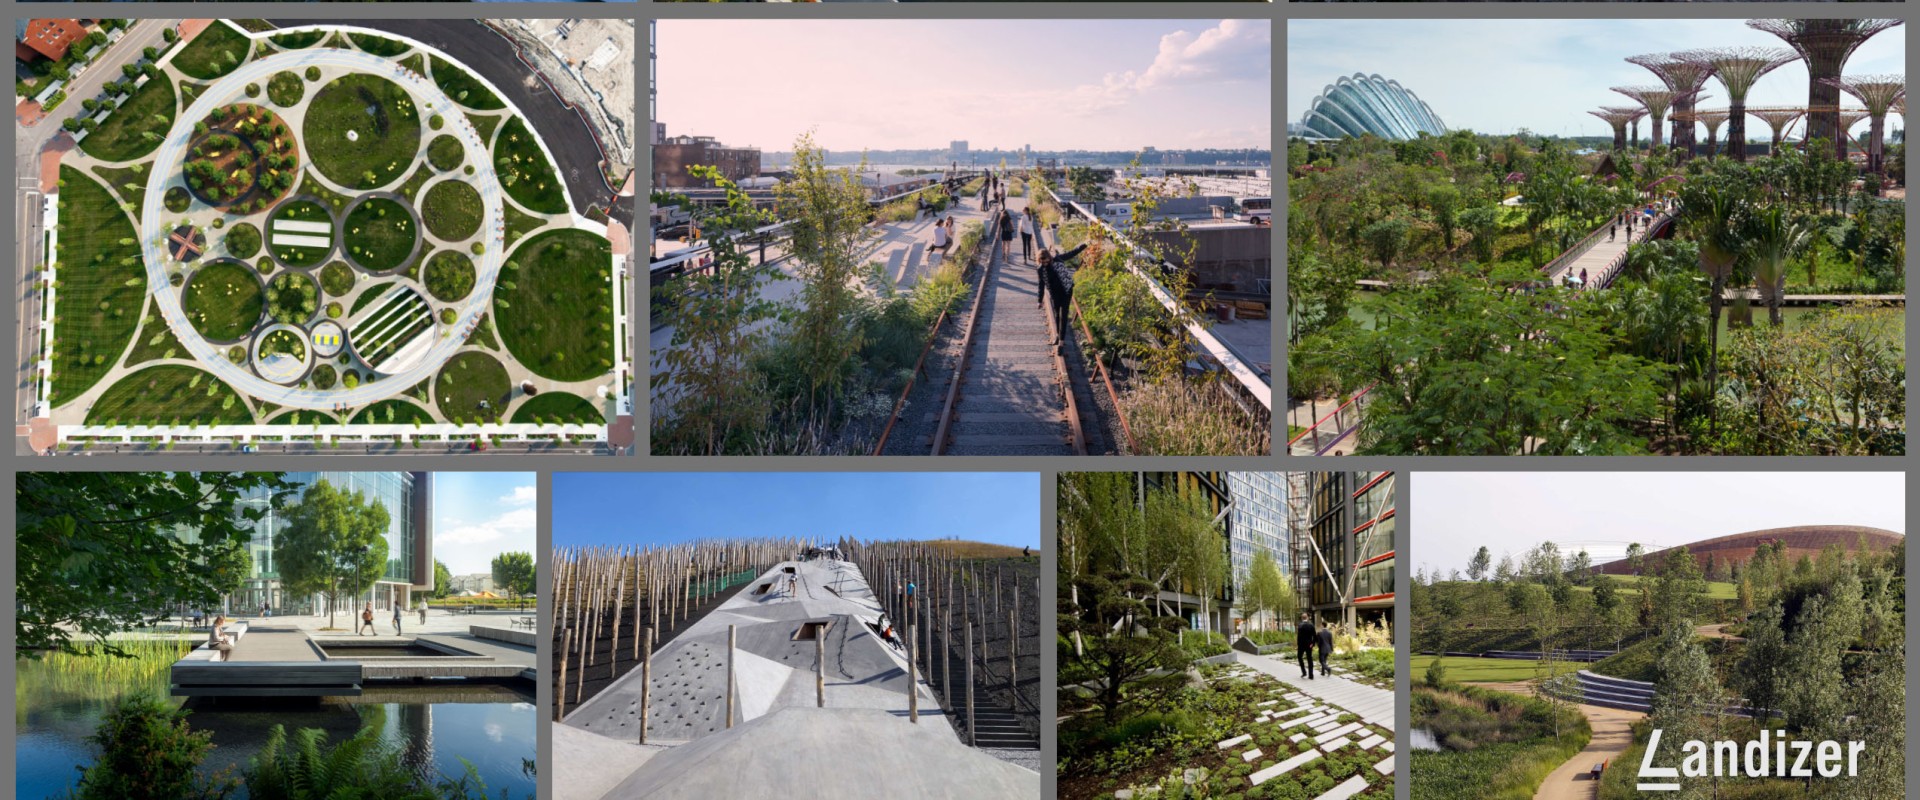 The Future of Landscape Architecture: What Does It Hold?